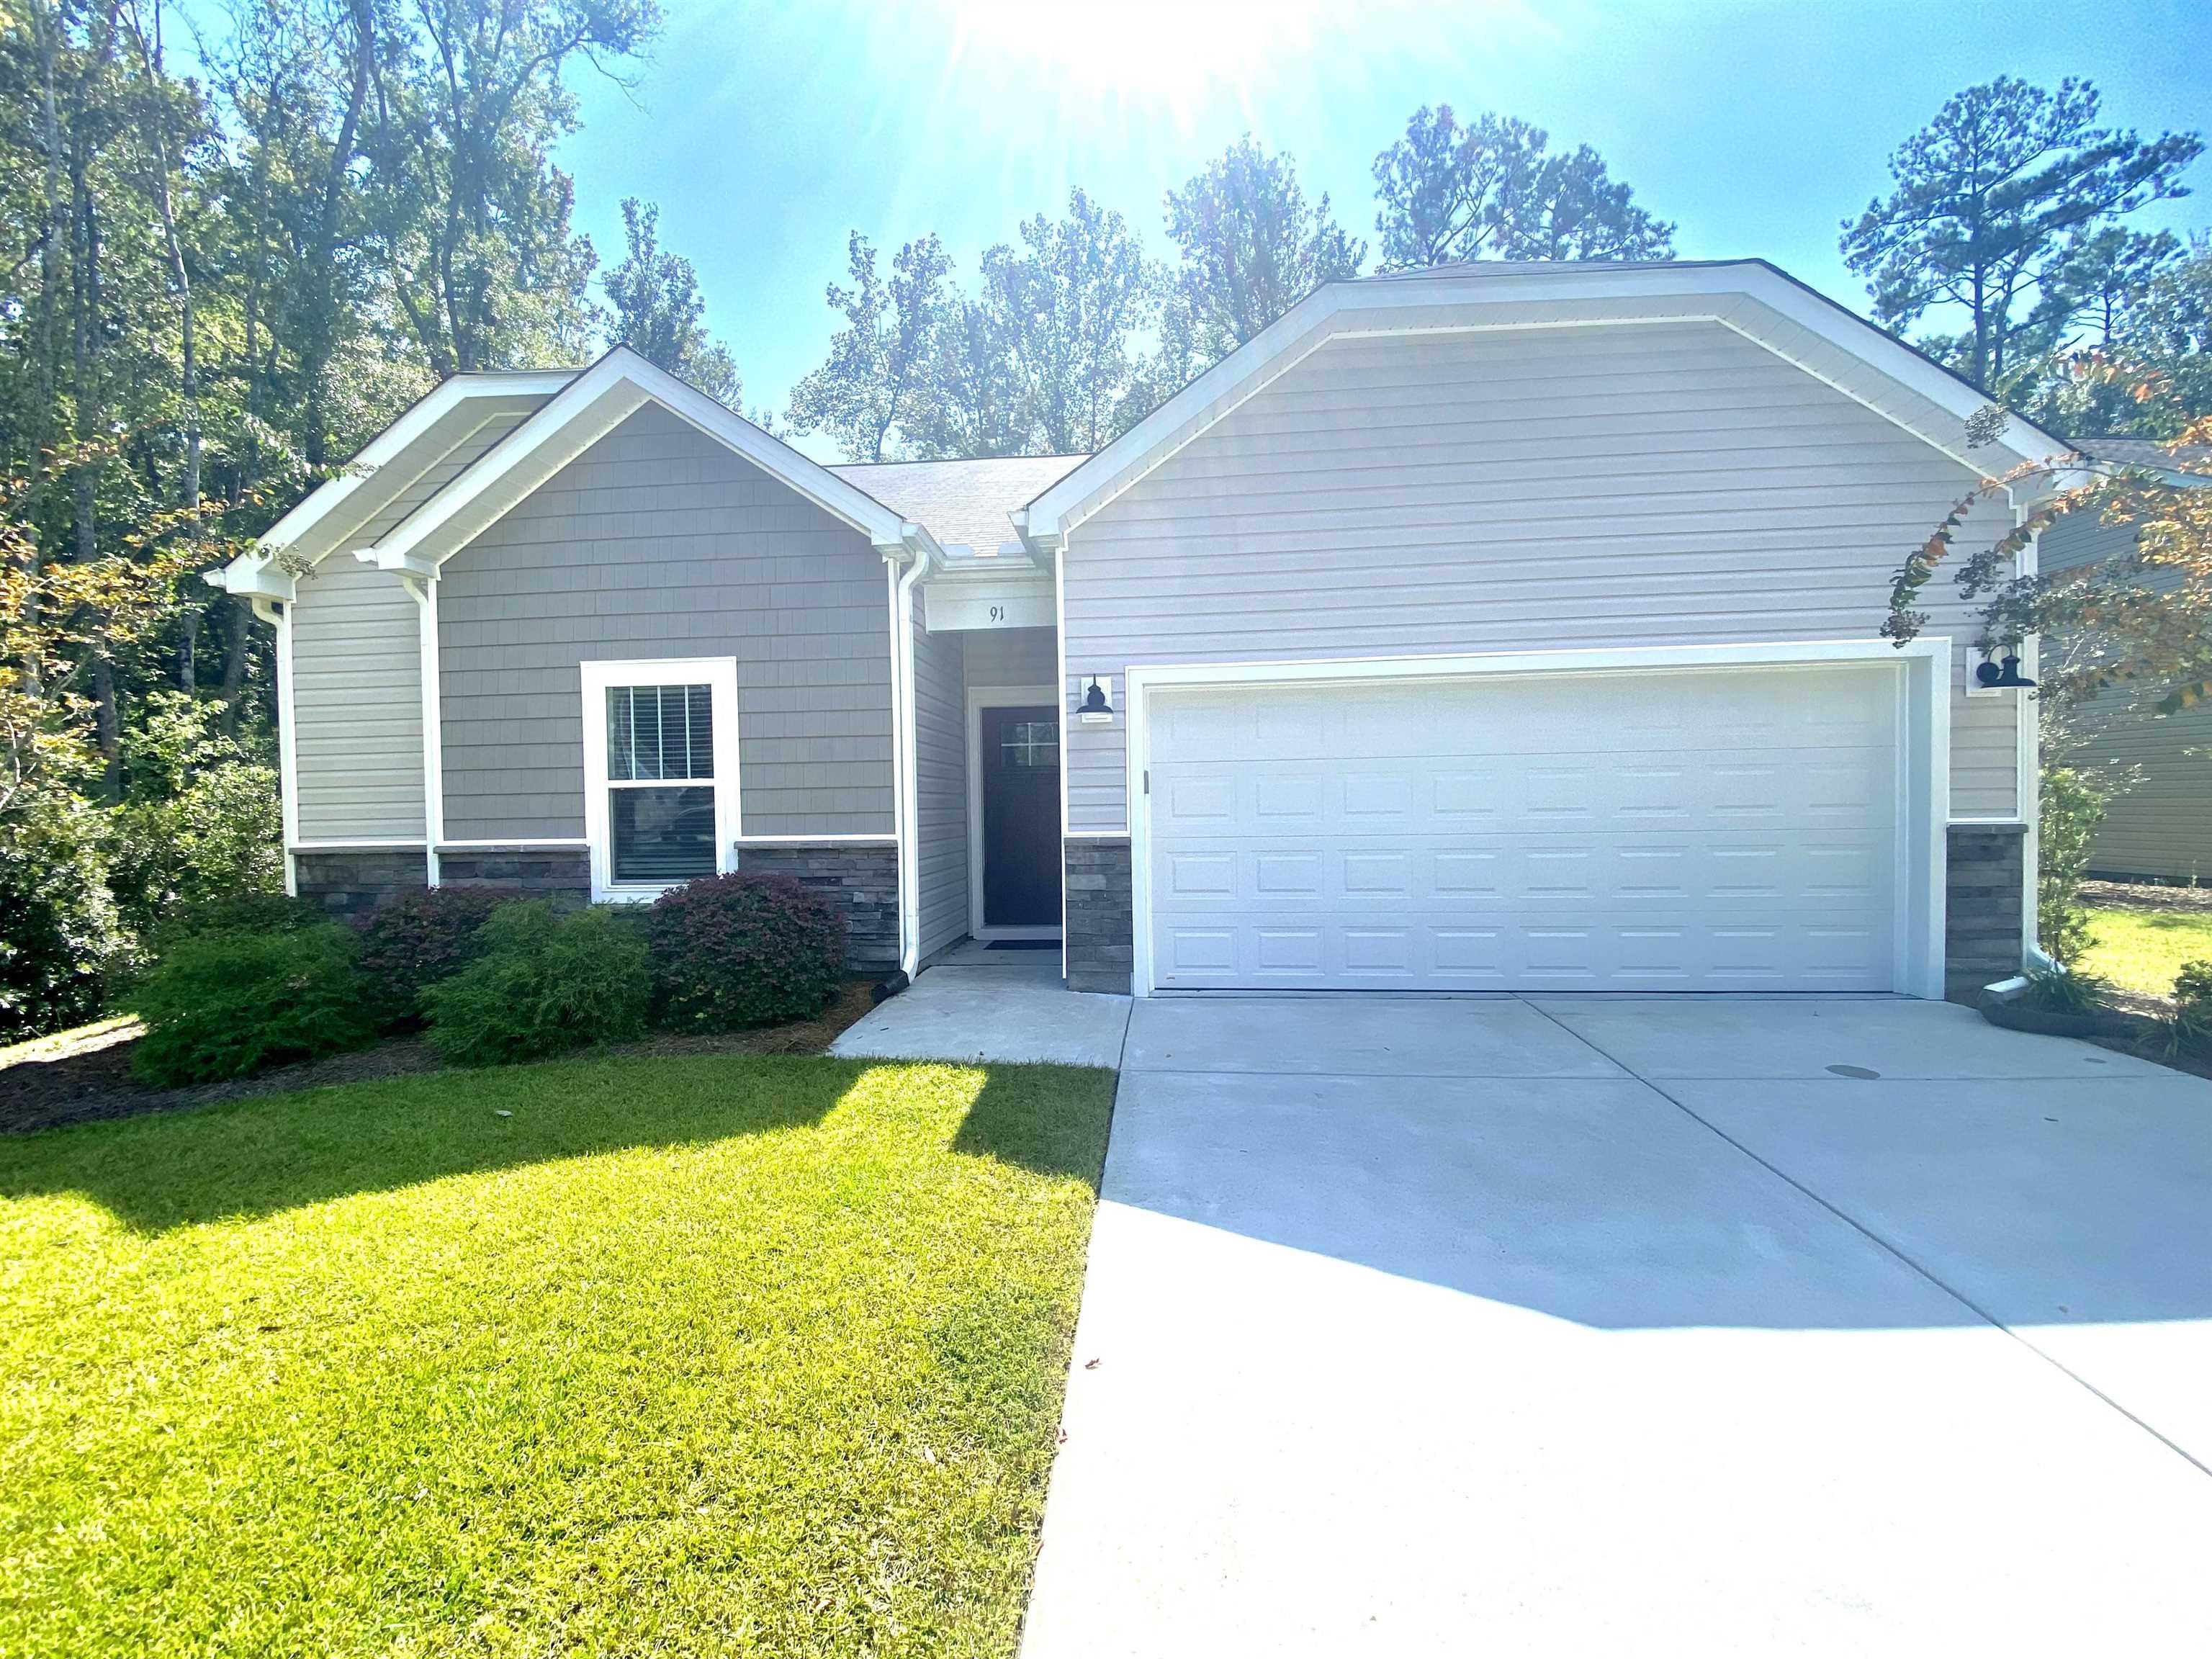 91 Clearwater Dr. Pawleys Island, SC 29585